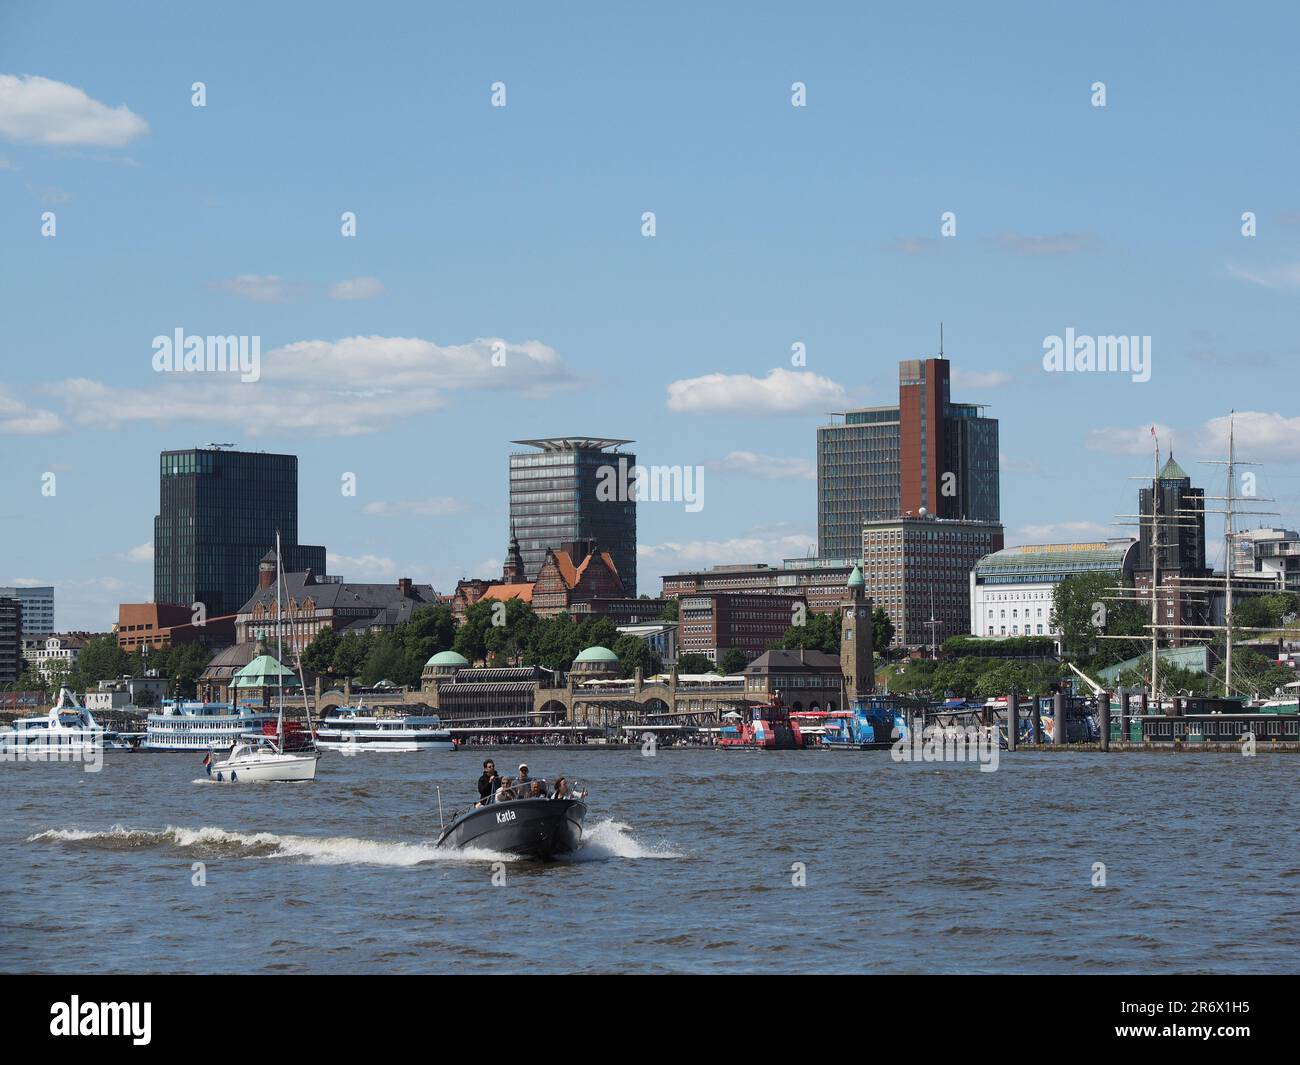 The city of Hamburg seen from the water of the river Elbe, with various small boats and people ejoying the sunny weather. Stock Photo